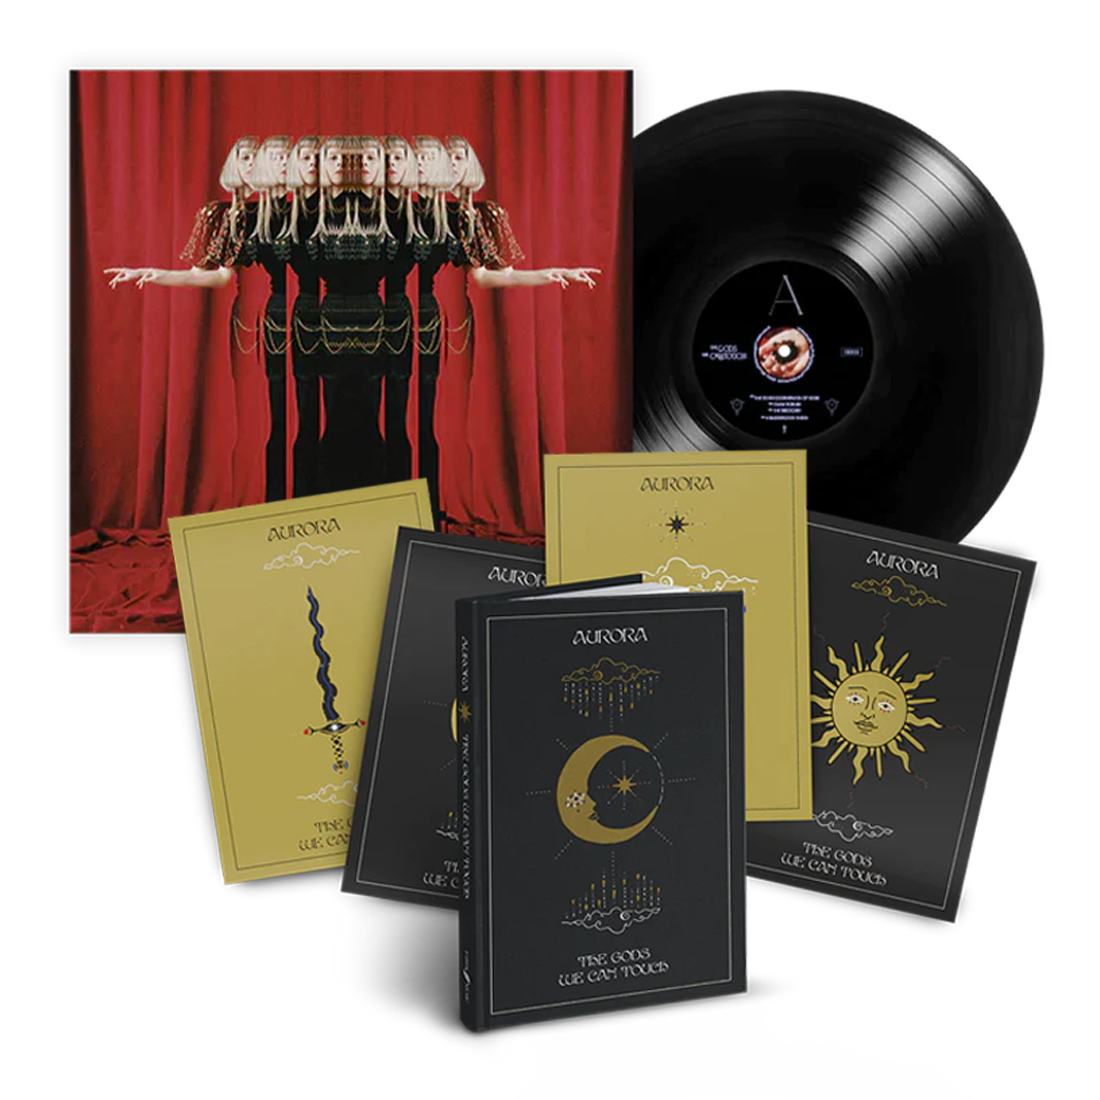 The Gods We Can Touch: Vinyl LP, Book + Exclusive Book Artcards